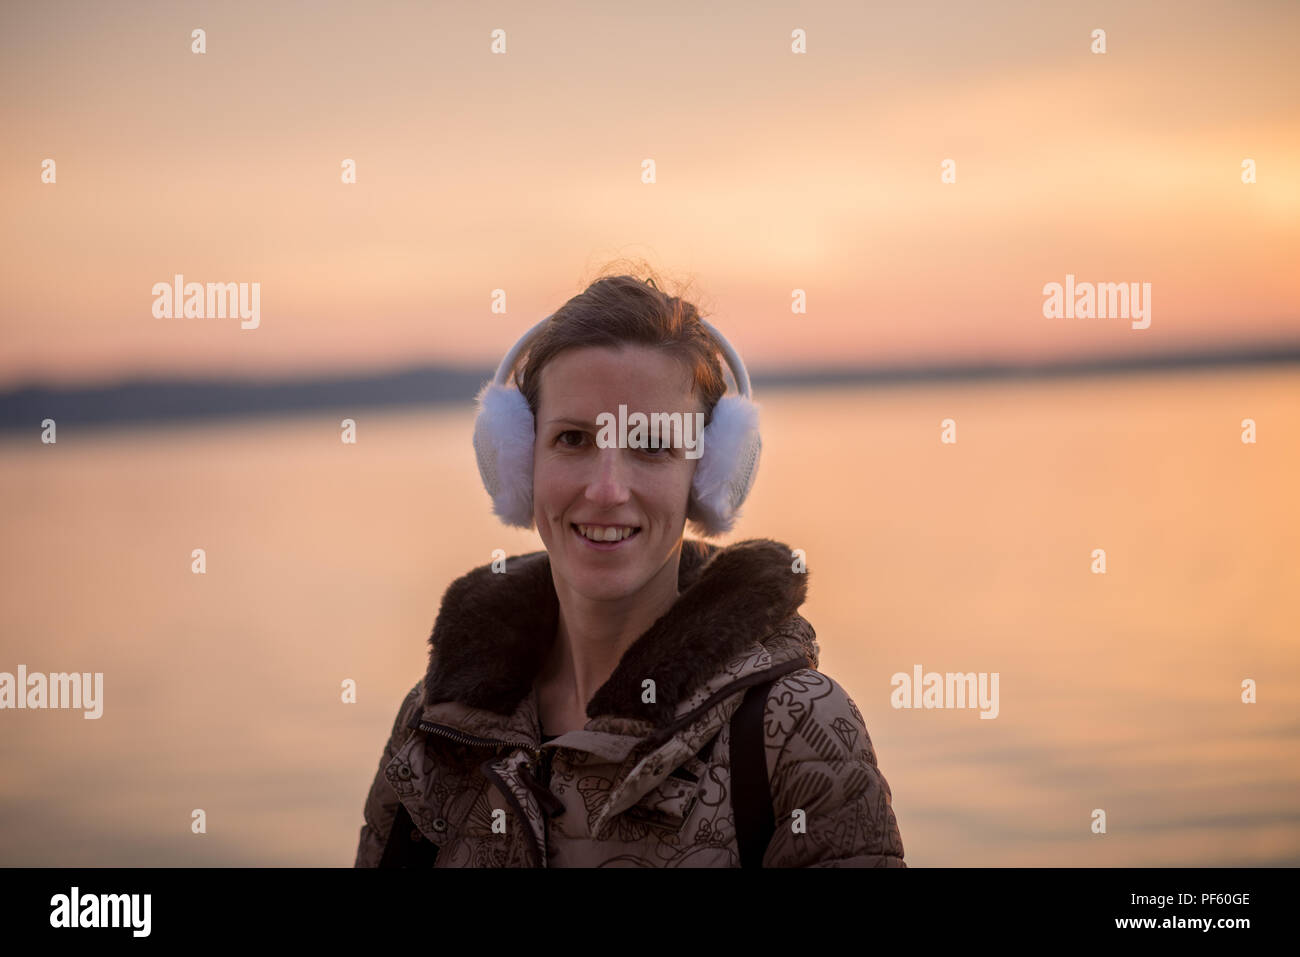 Smiling woman wearing fluffy ear muffs at sunset standing against an ocean as she enjoys a winter evening outdoors. Stock Photo